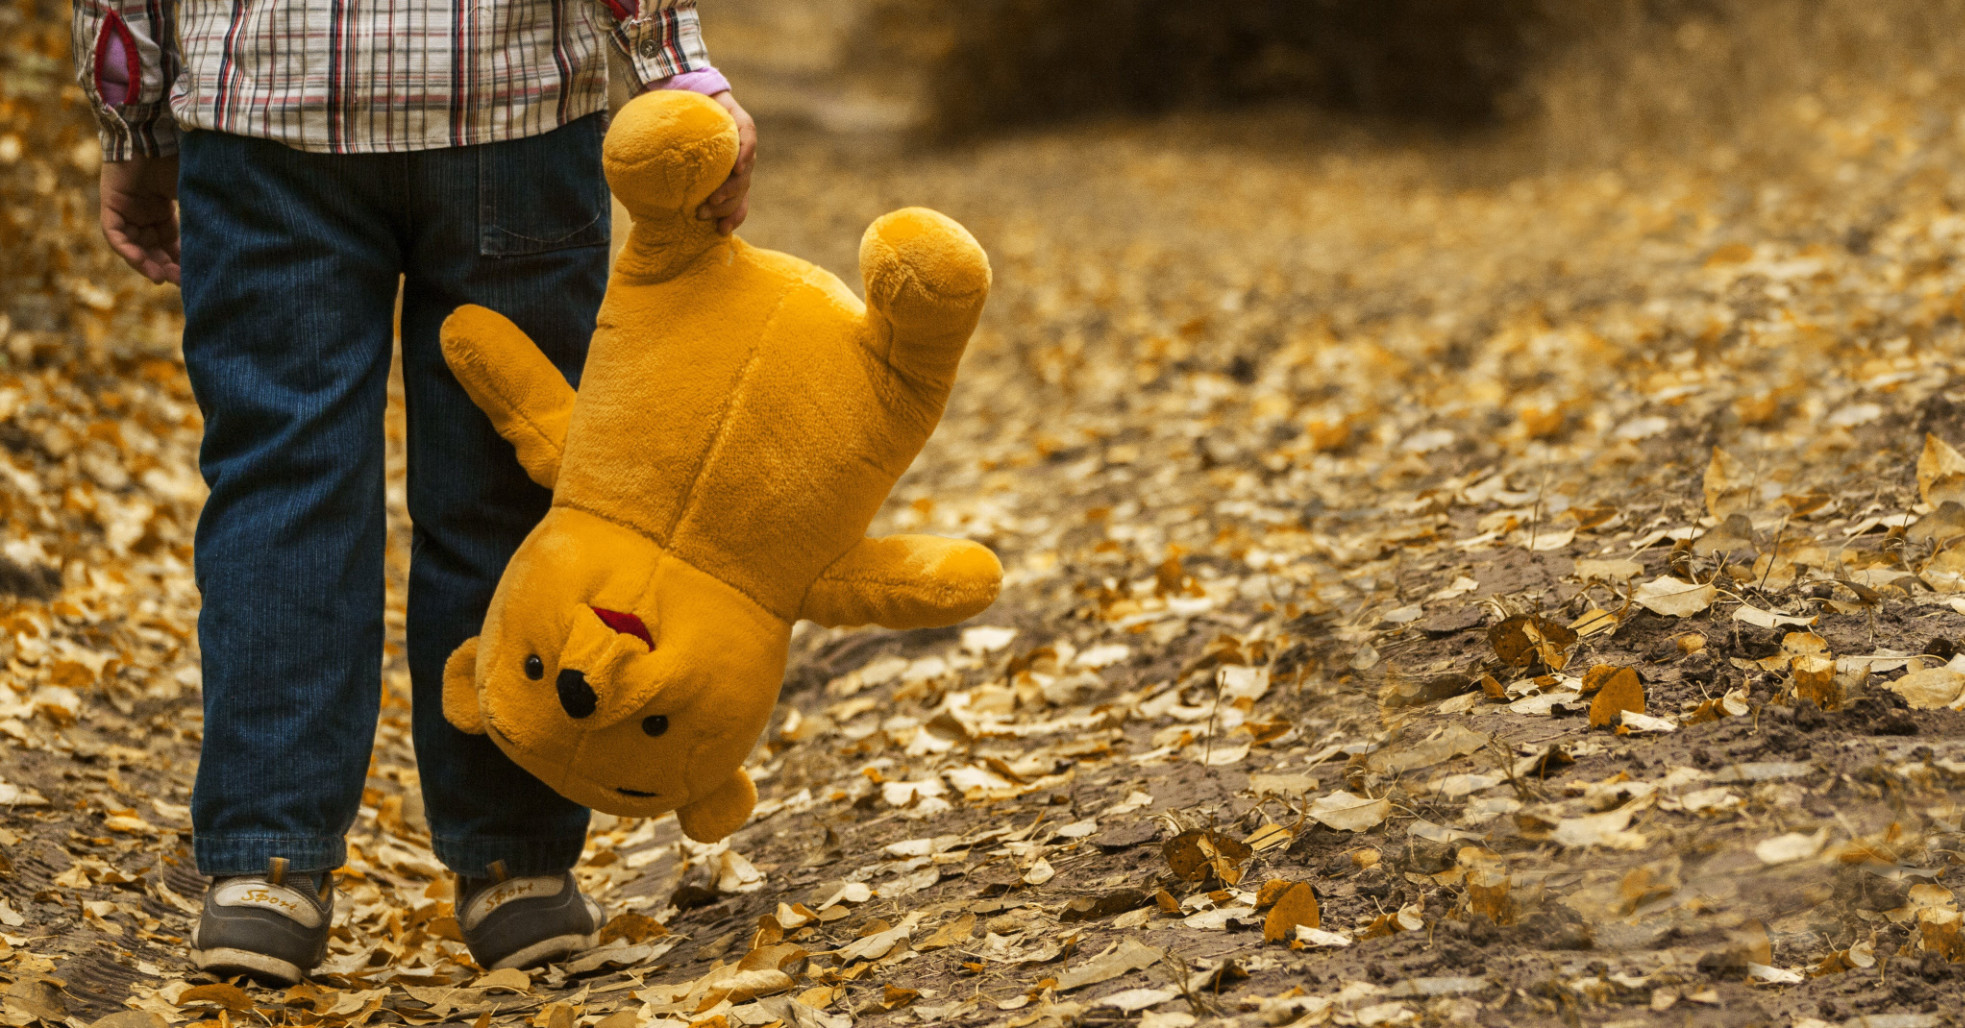 child carrying Winnie the Pooh teddy bear by the leg